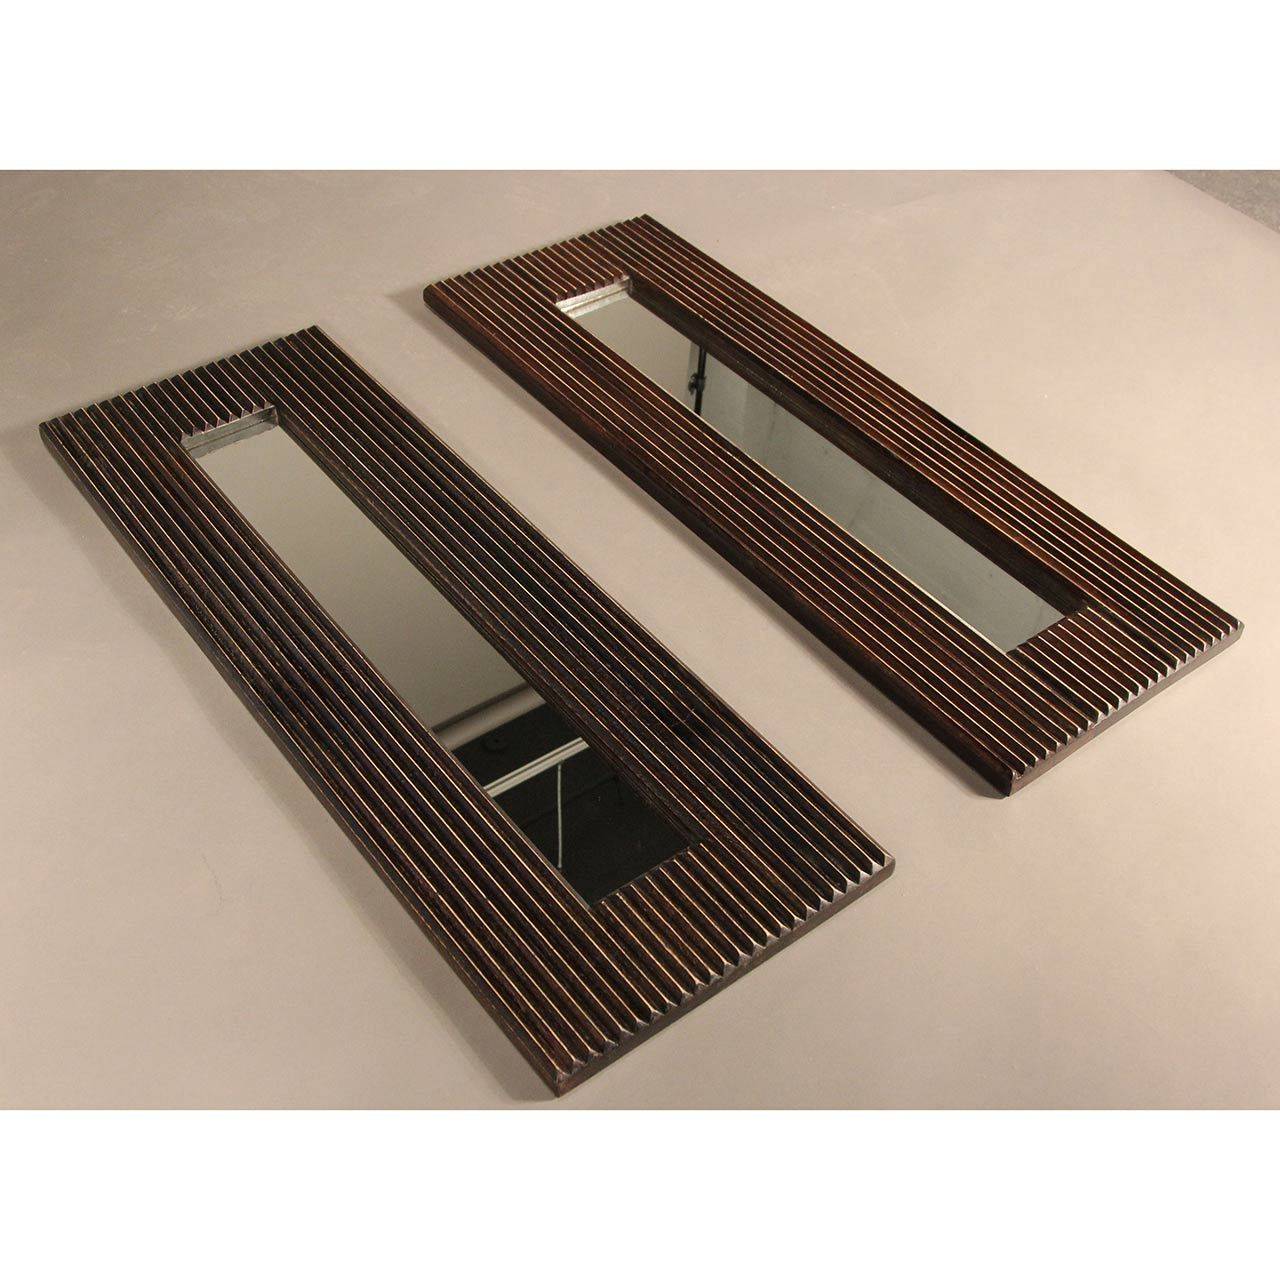 American Pair of Dramatic Art Deco Style Mirrors